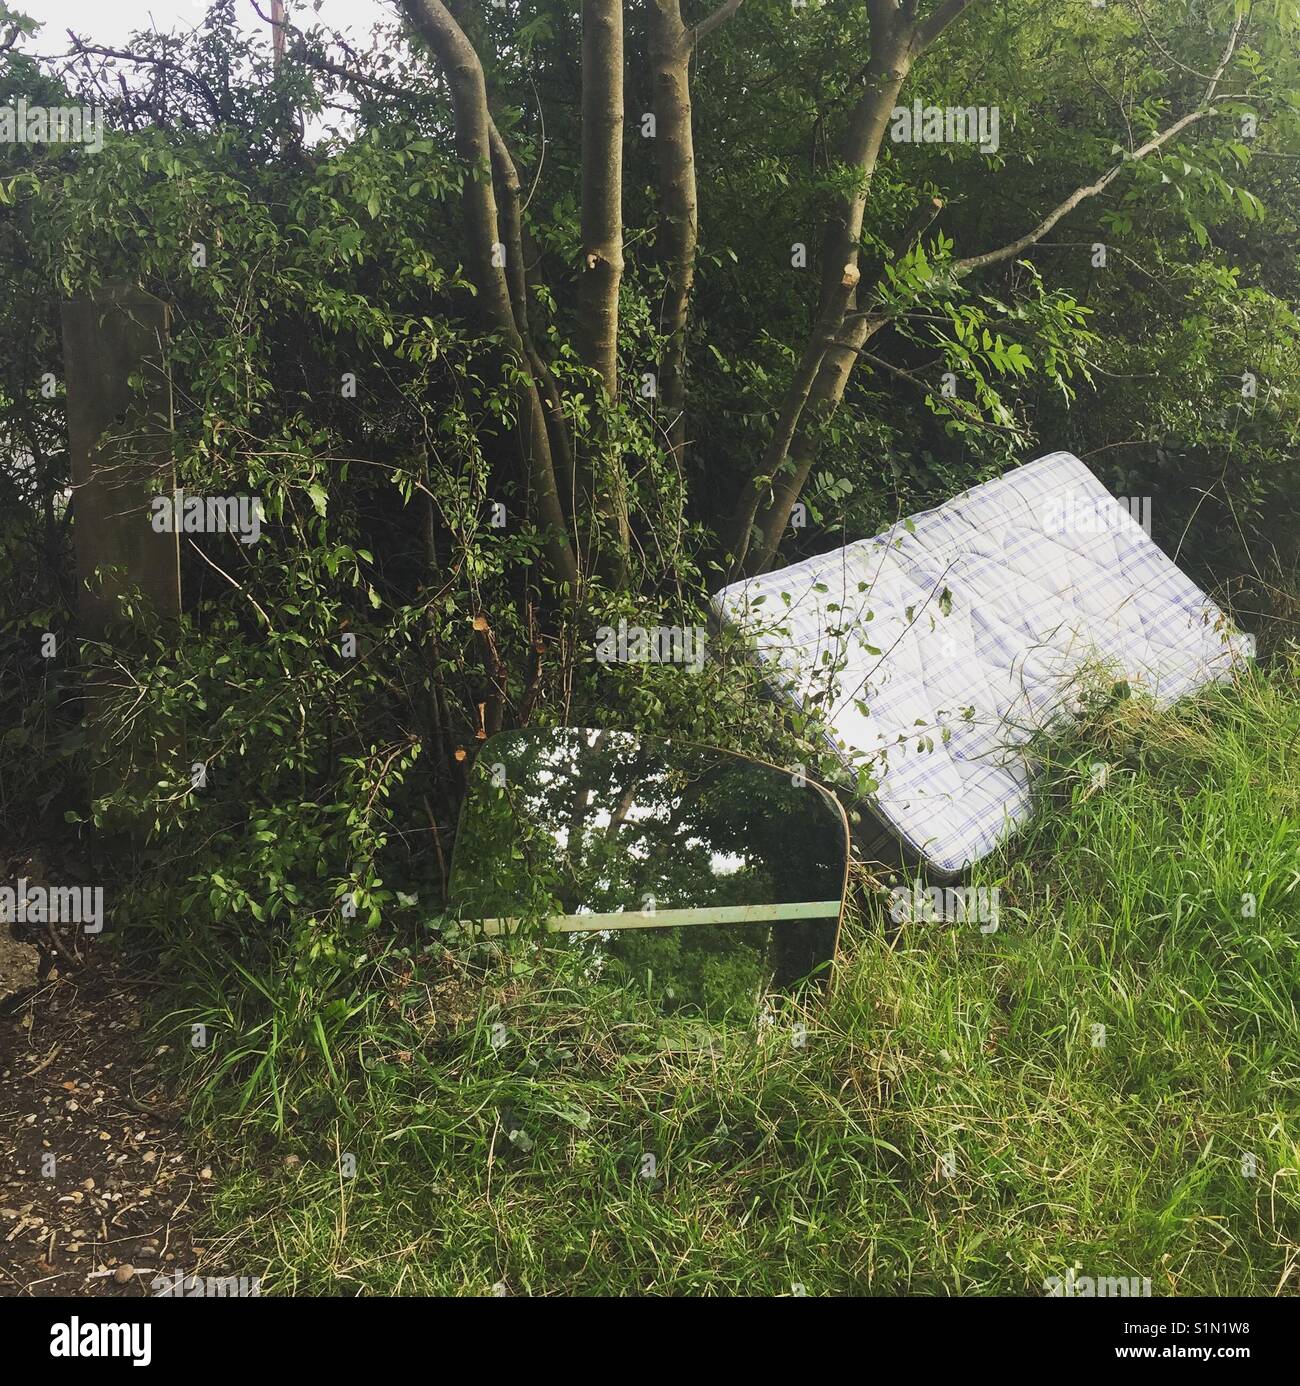 Discarded mirror and mattress in nature Stock Photo